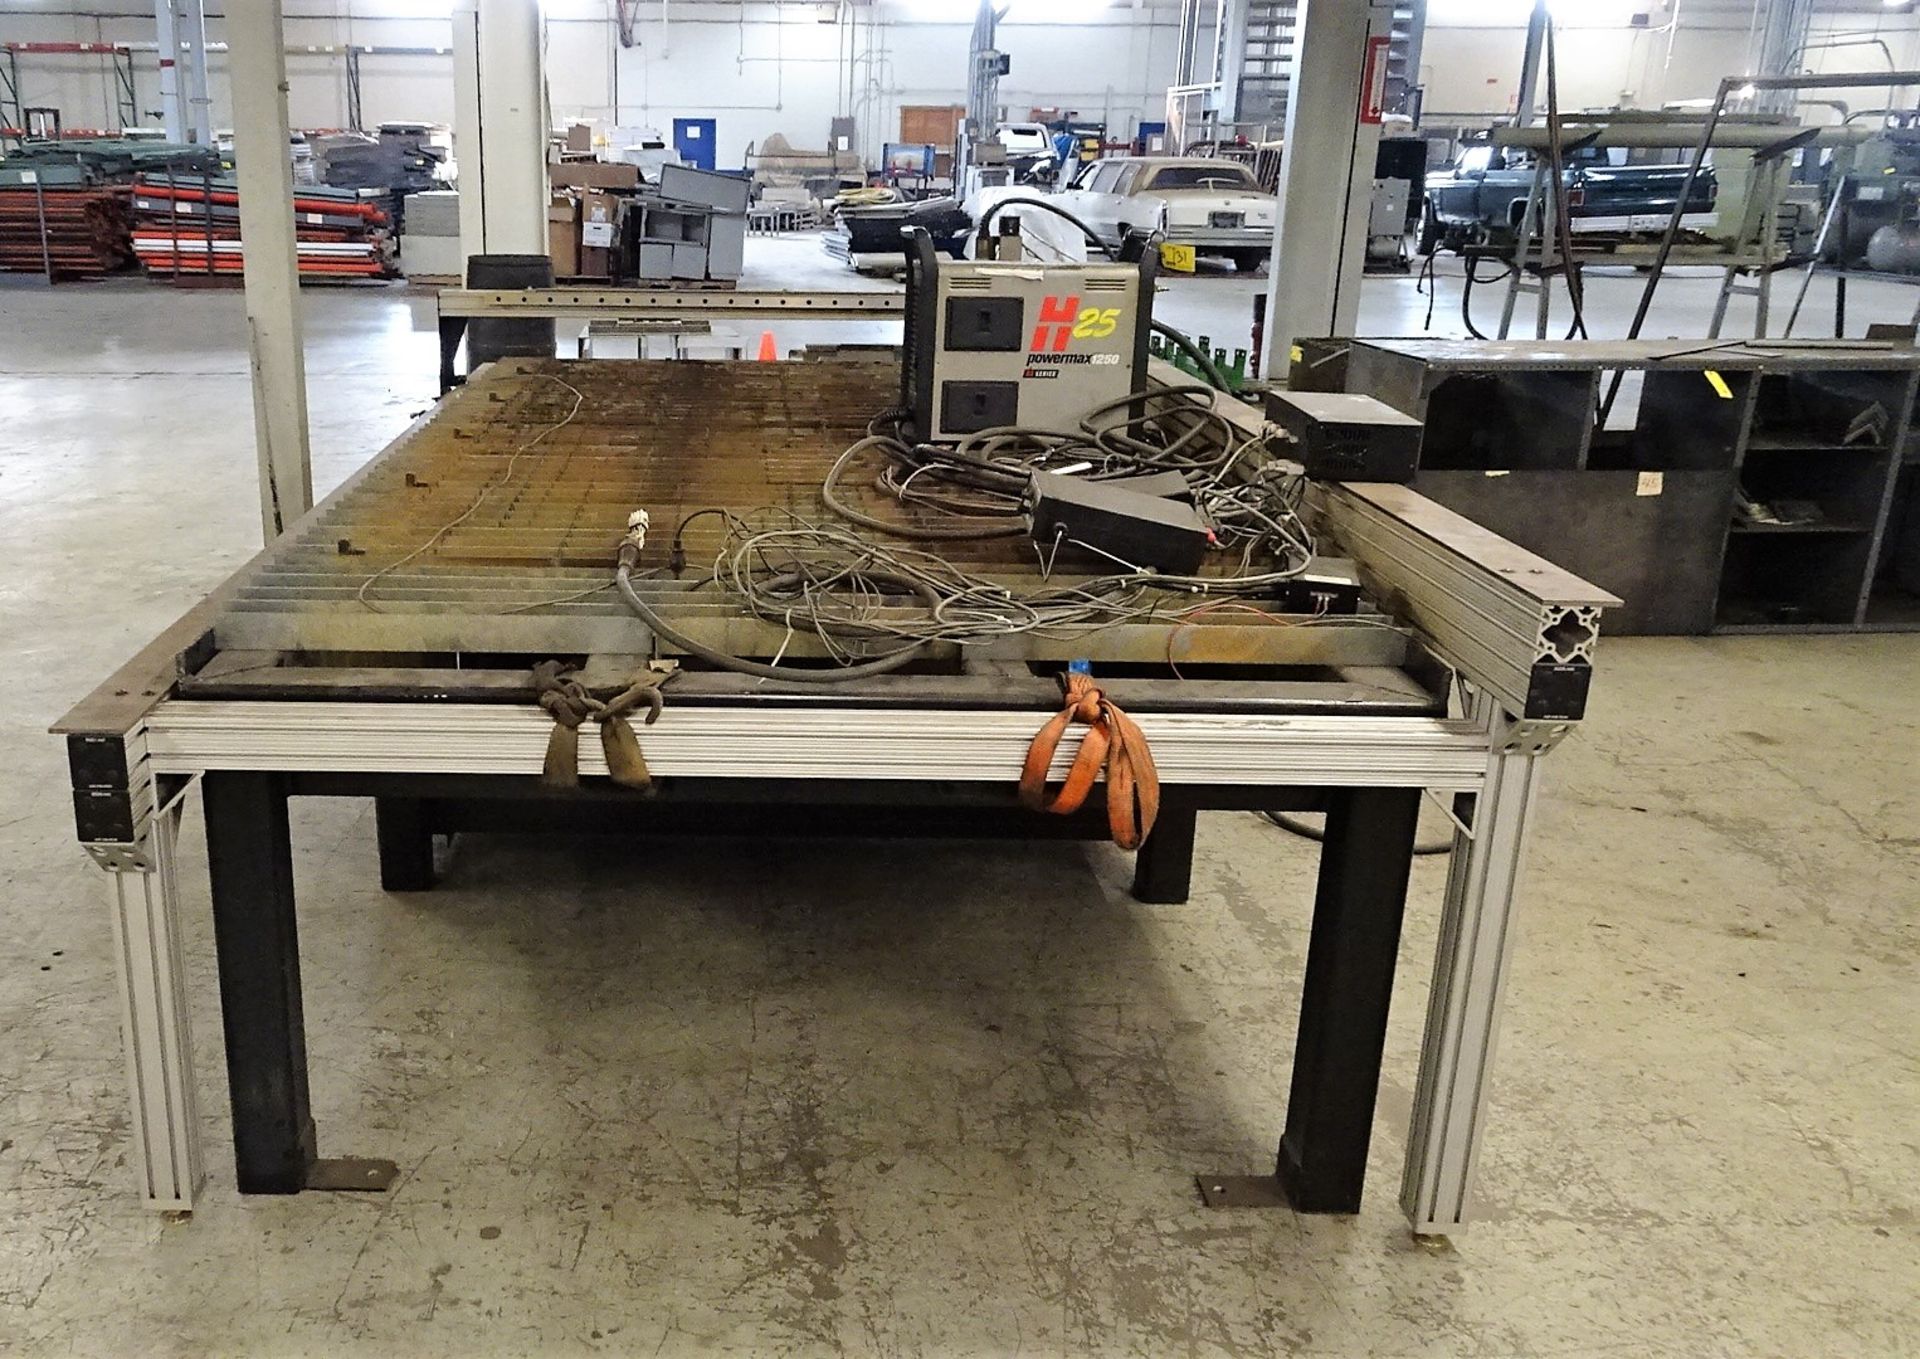 (1) TORCH MATE PLASMA CUTTER, SINGLE HEAD, HYPOTHERM POWER MAX 1250 POWER SUPPLY, TABLE SIZE 10' X - Image 2 of 3